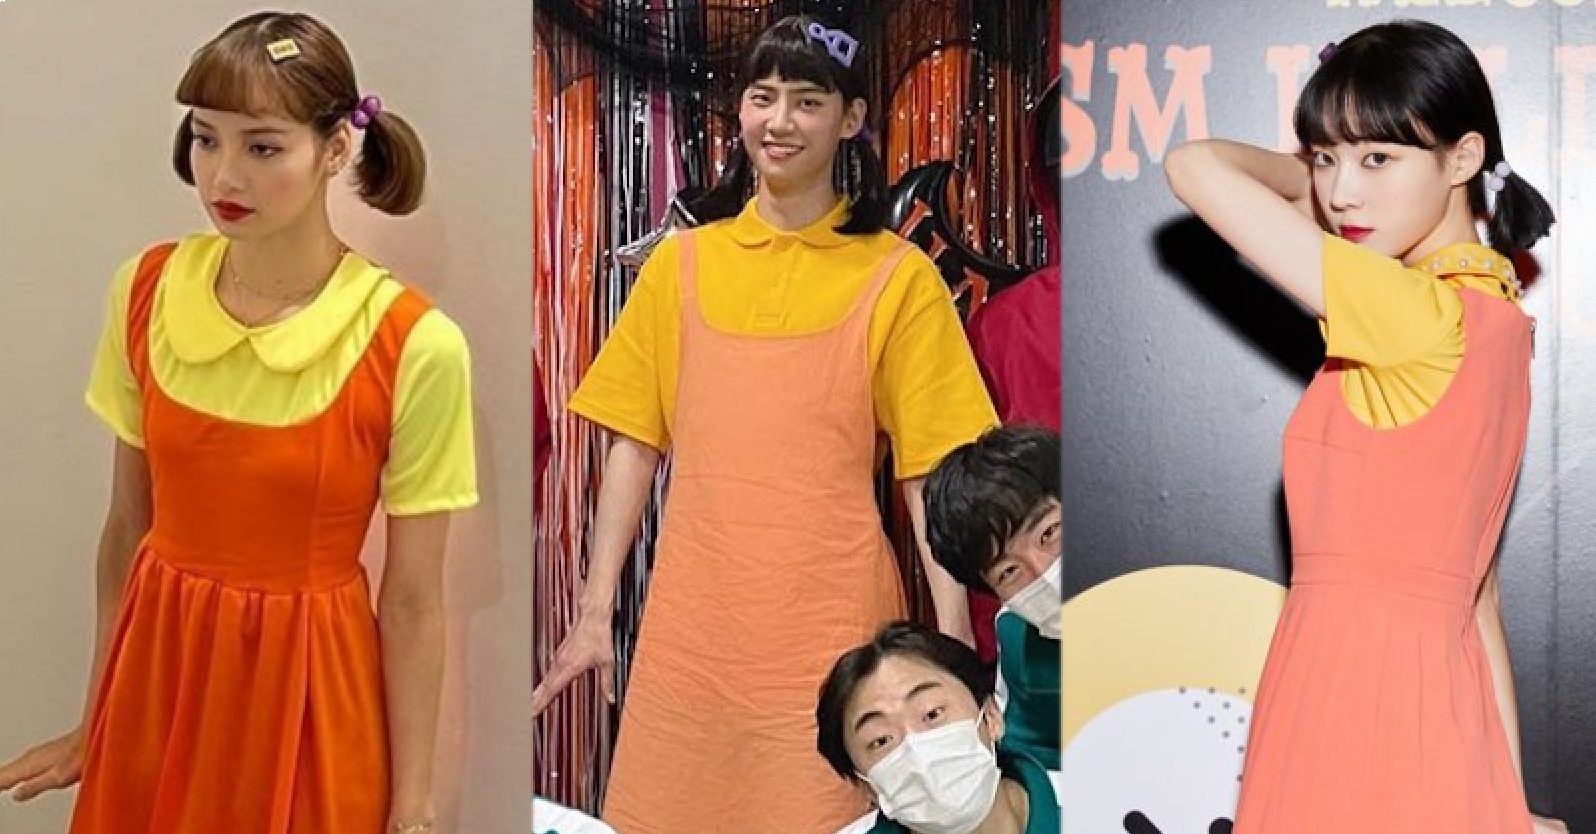 These Idols May Wear The Same "Squid Game"Outfit But Served Completely Different Spooky Vibes